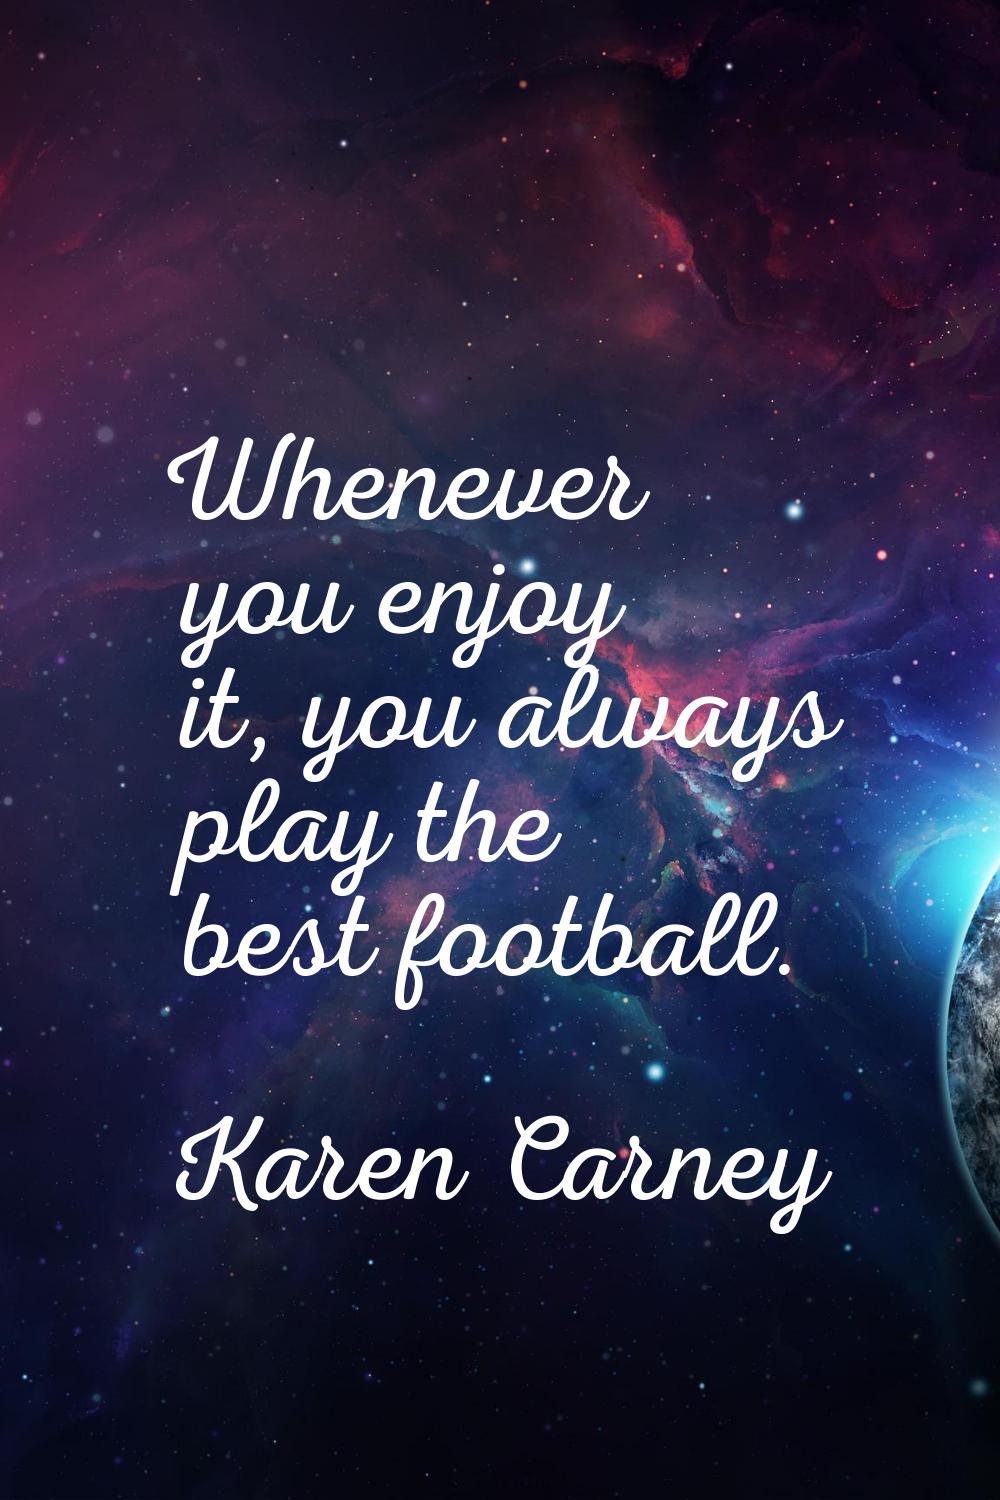 Whenever you enjoy it, you always play the best football.